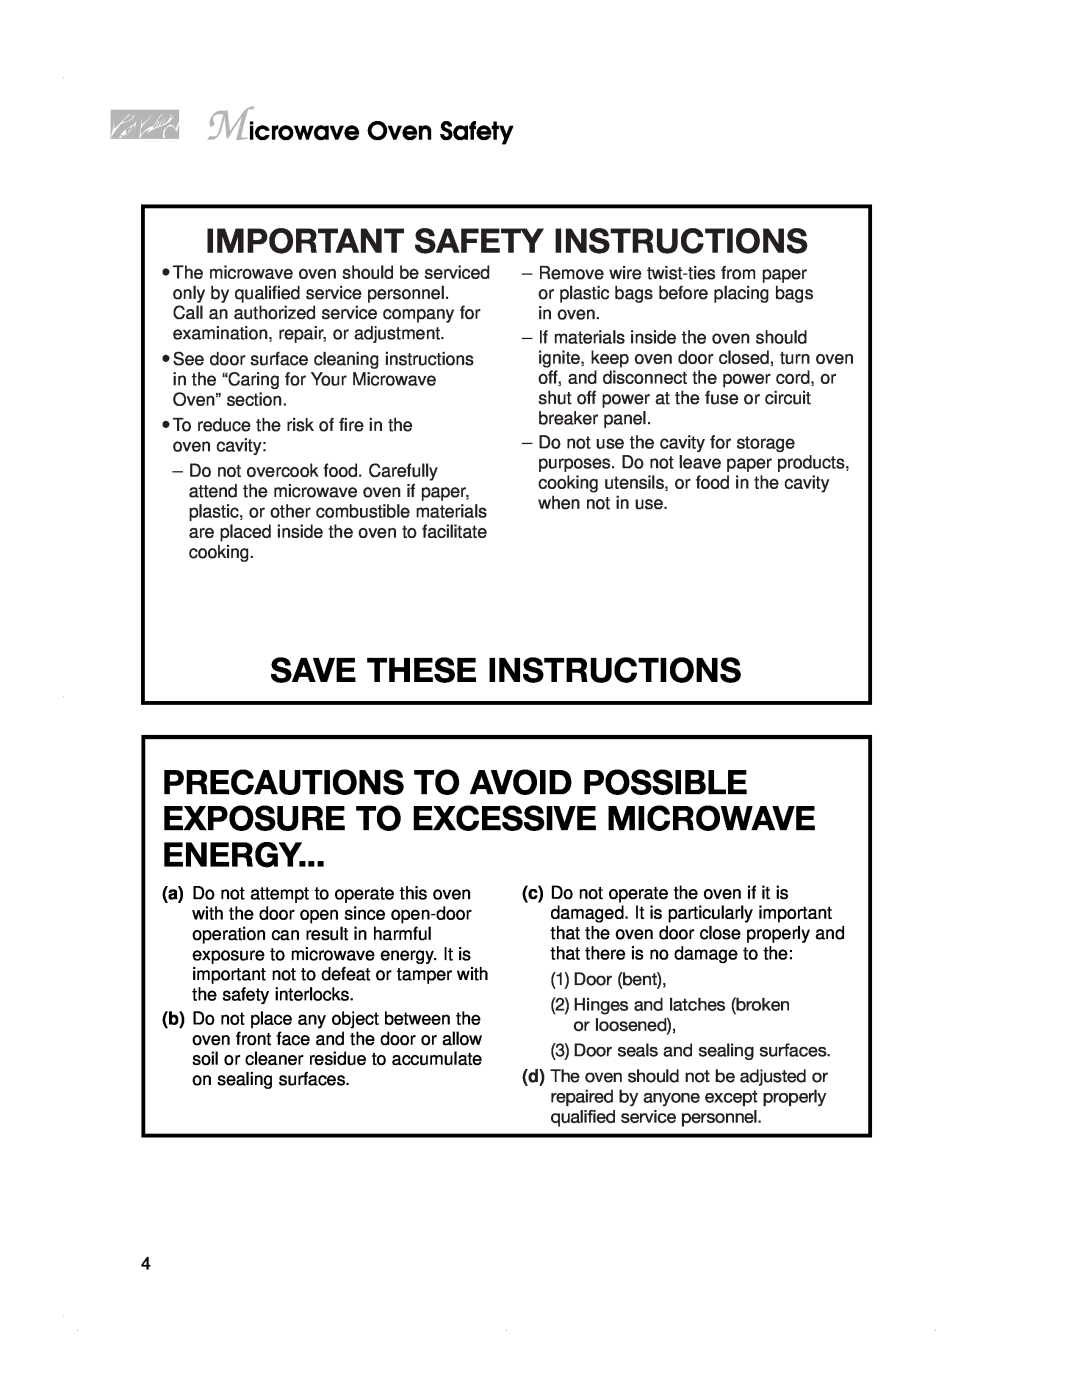 KitchenAid KEMS308G, KBMC147H Precautions To Avoid Possible Exposure To Excessive Microwave Energy, Microwave Oven Safety 